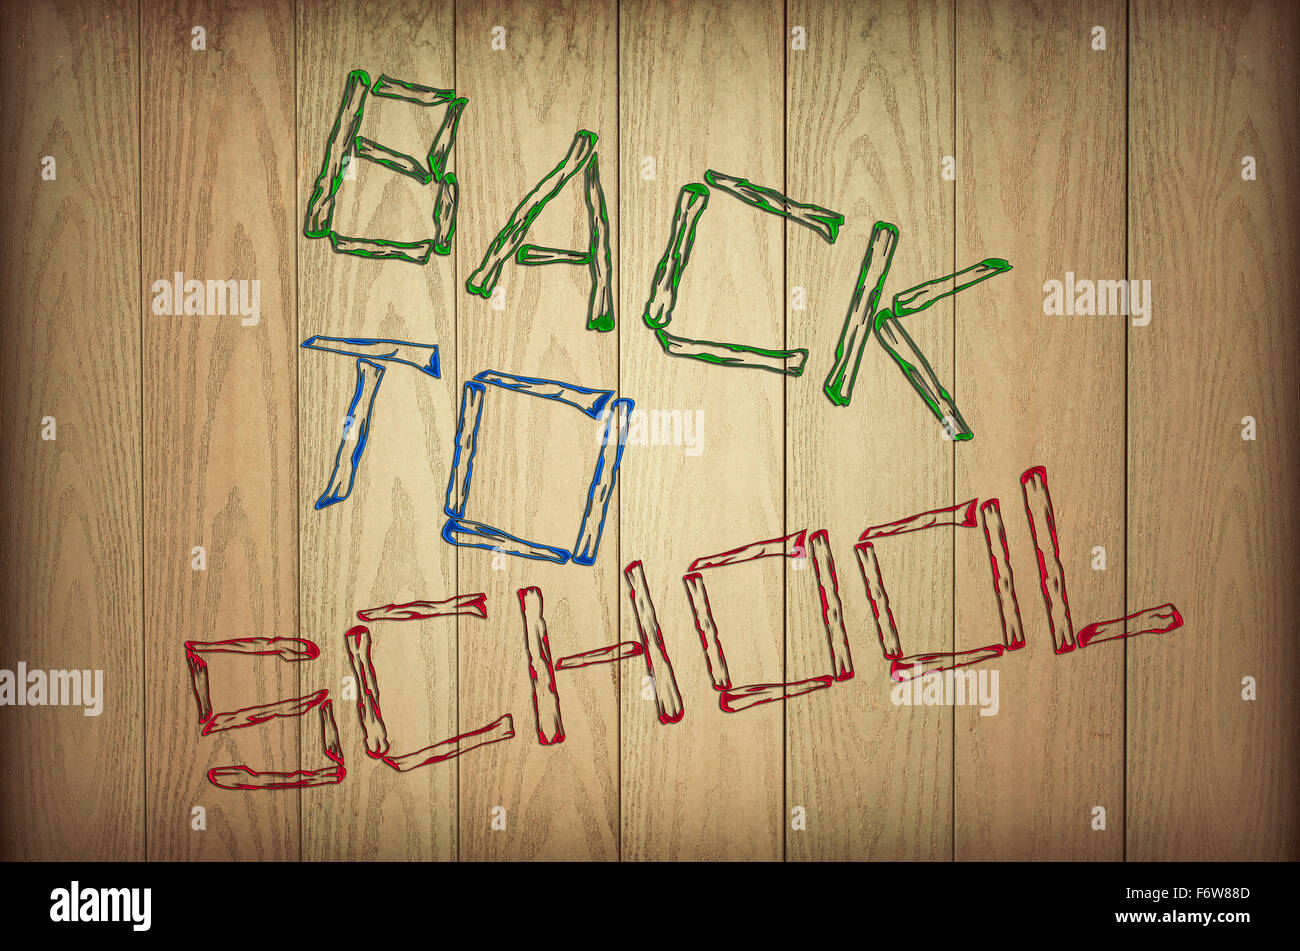 back to school design on wooden background Stock Photo